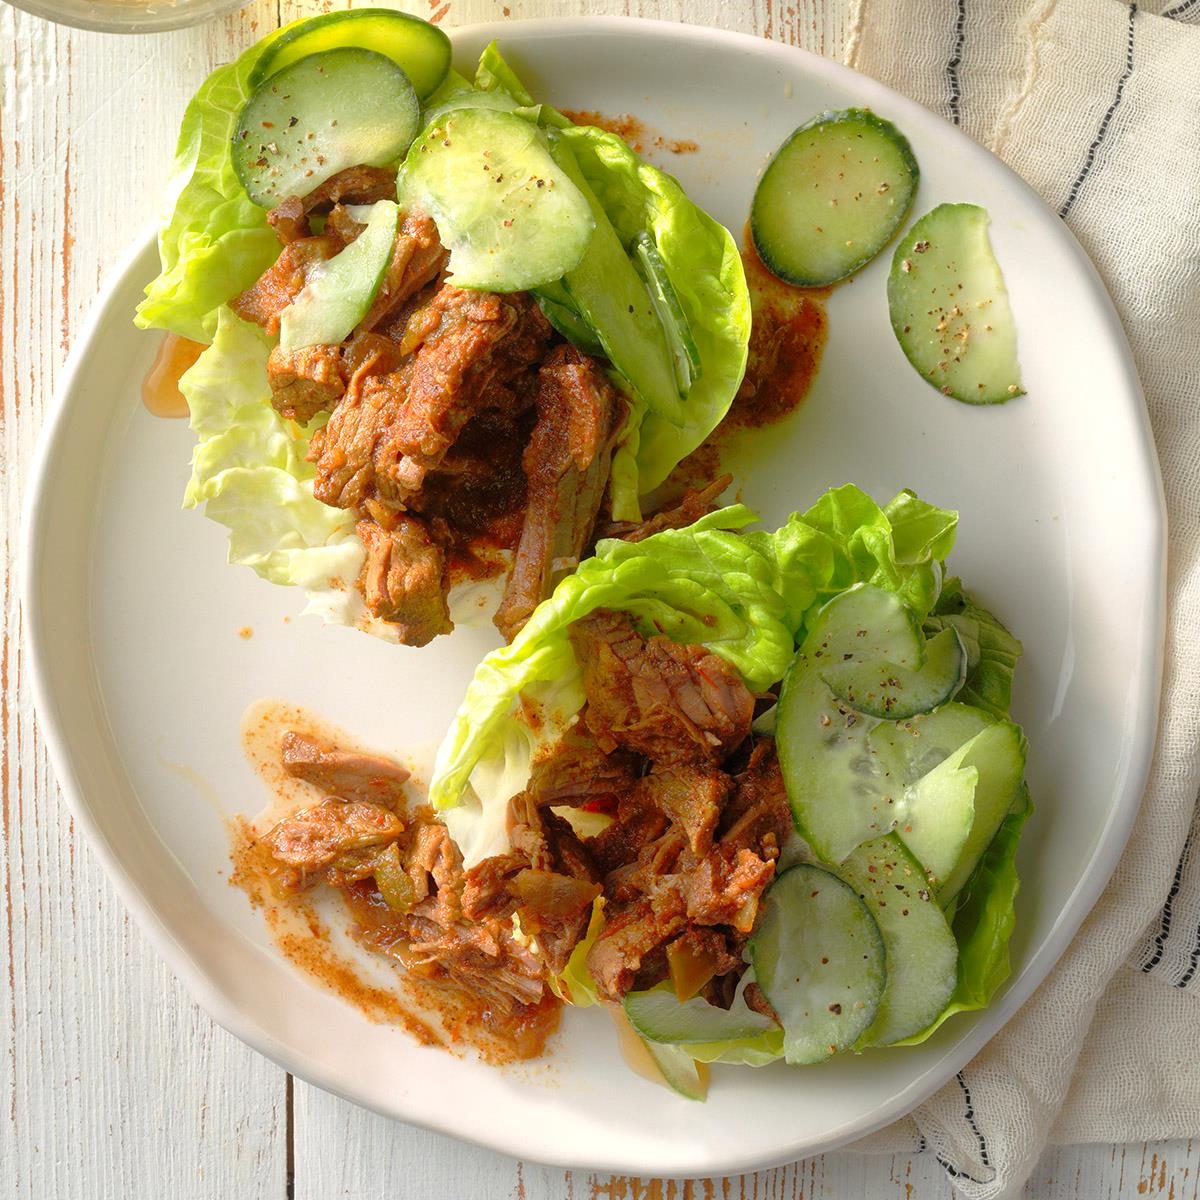 Moroccan Lamb Lettuce Wraps Recipe: How to Make It